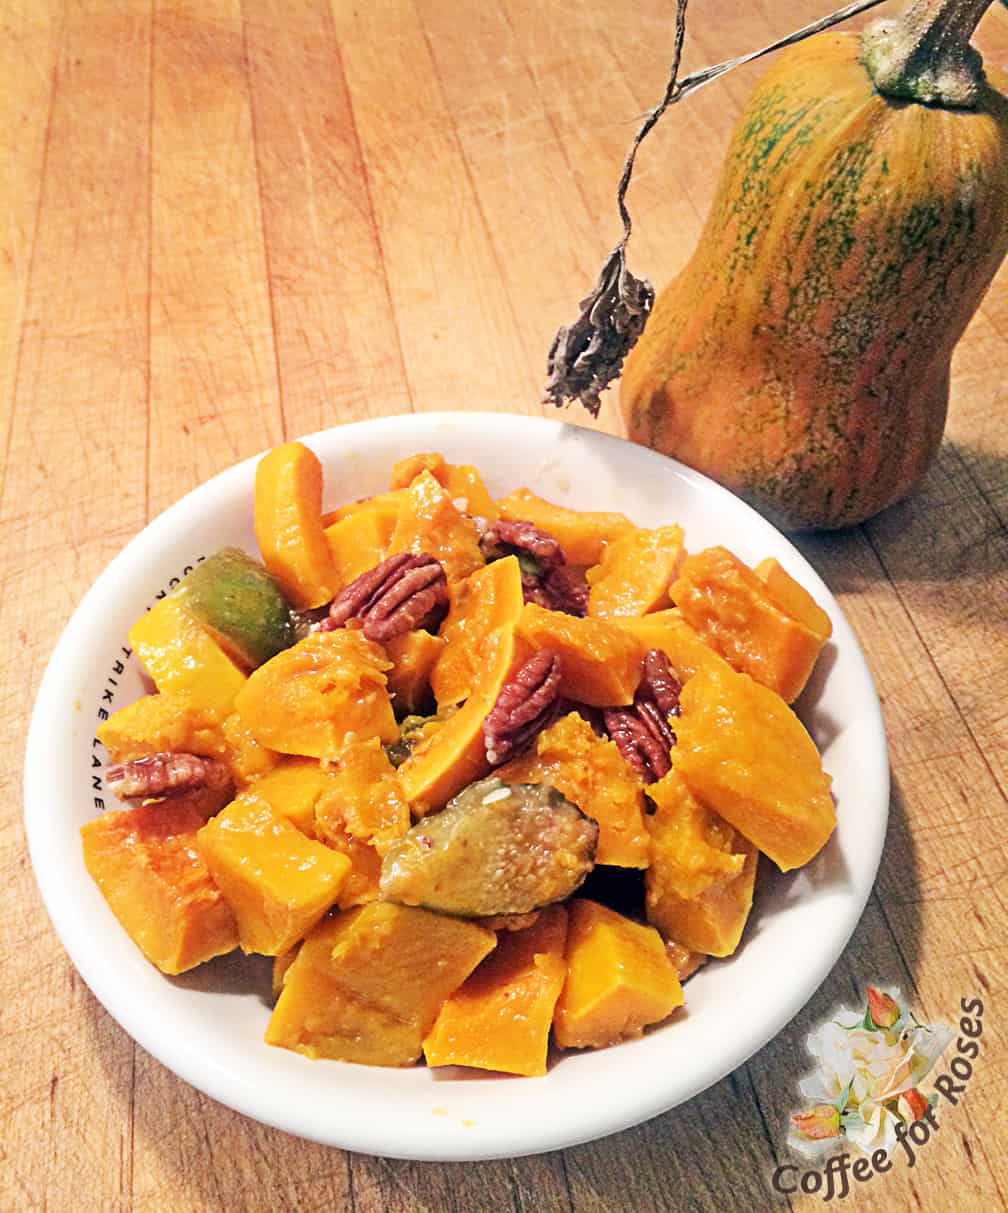 Winter squash combined with a fall fruit and nuts...toss with a walnut oil balsamic, and maple syrup vinaigrette dressing.  